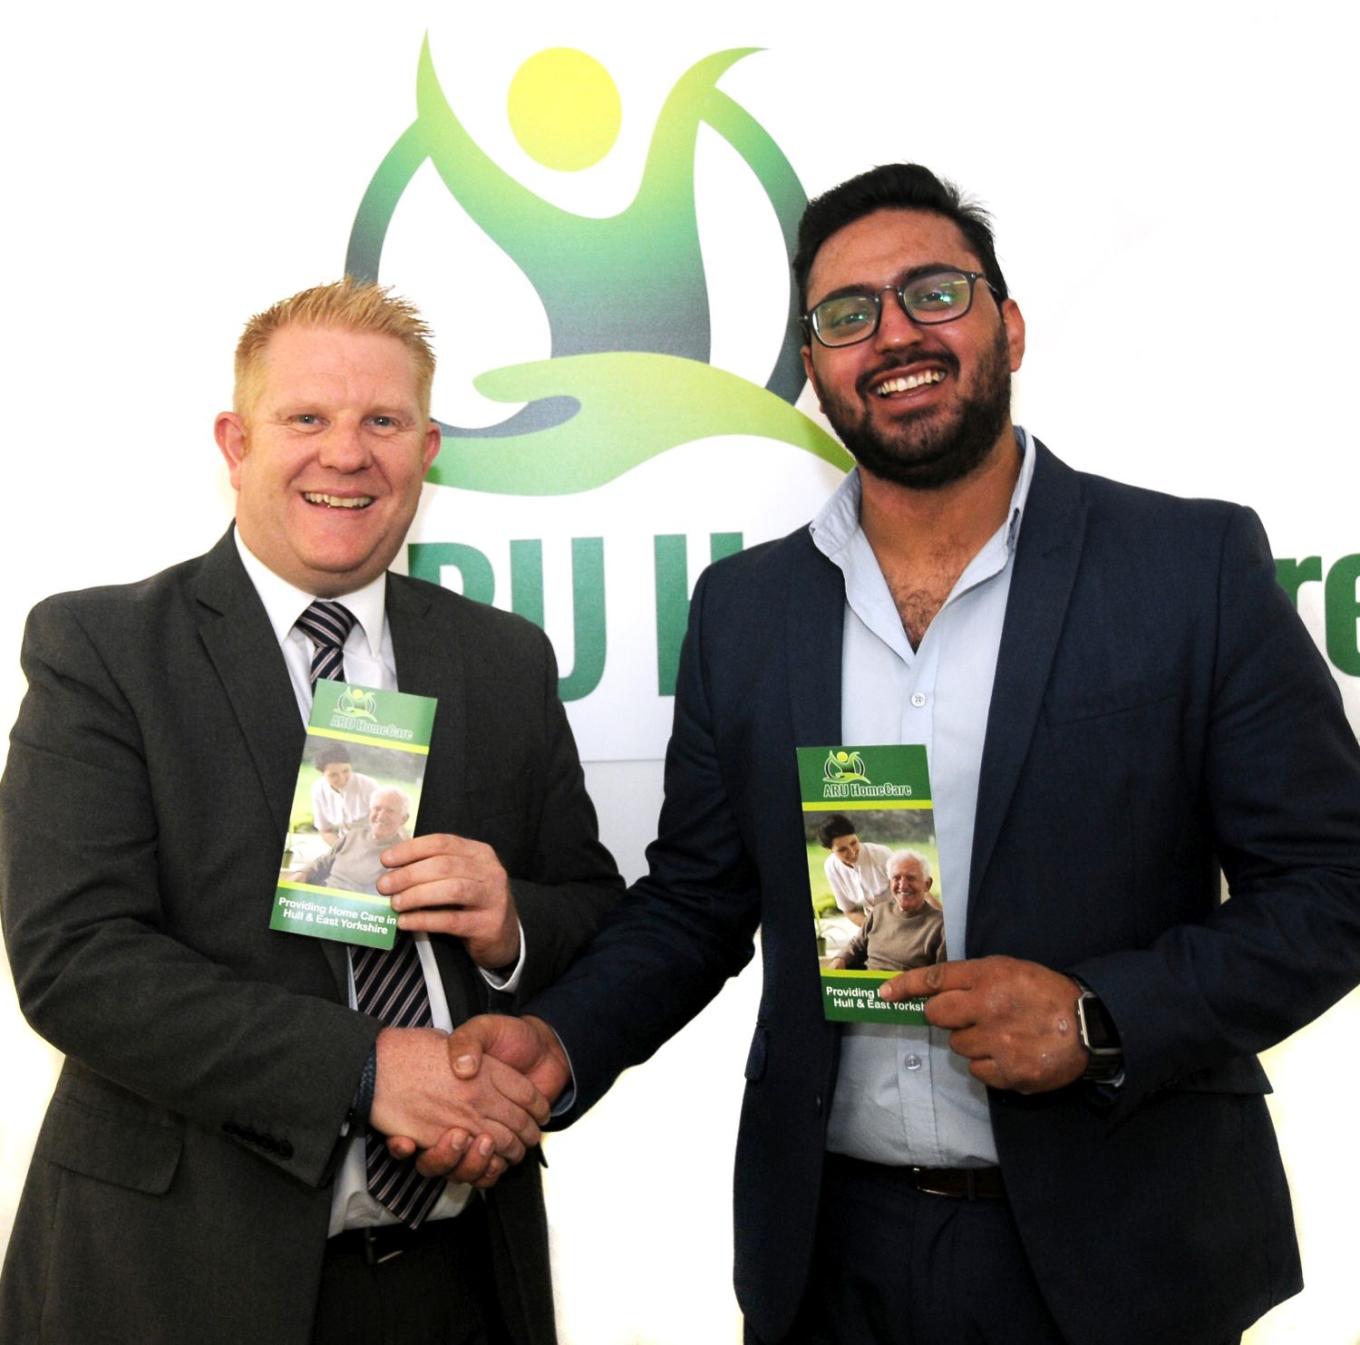 2 men in suits shaking hands and holding Aru Home Care leaflets with the logo on the wall behind them